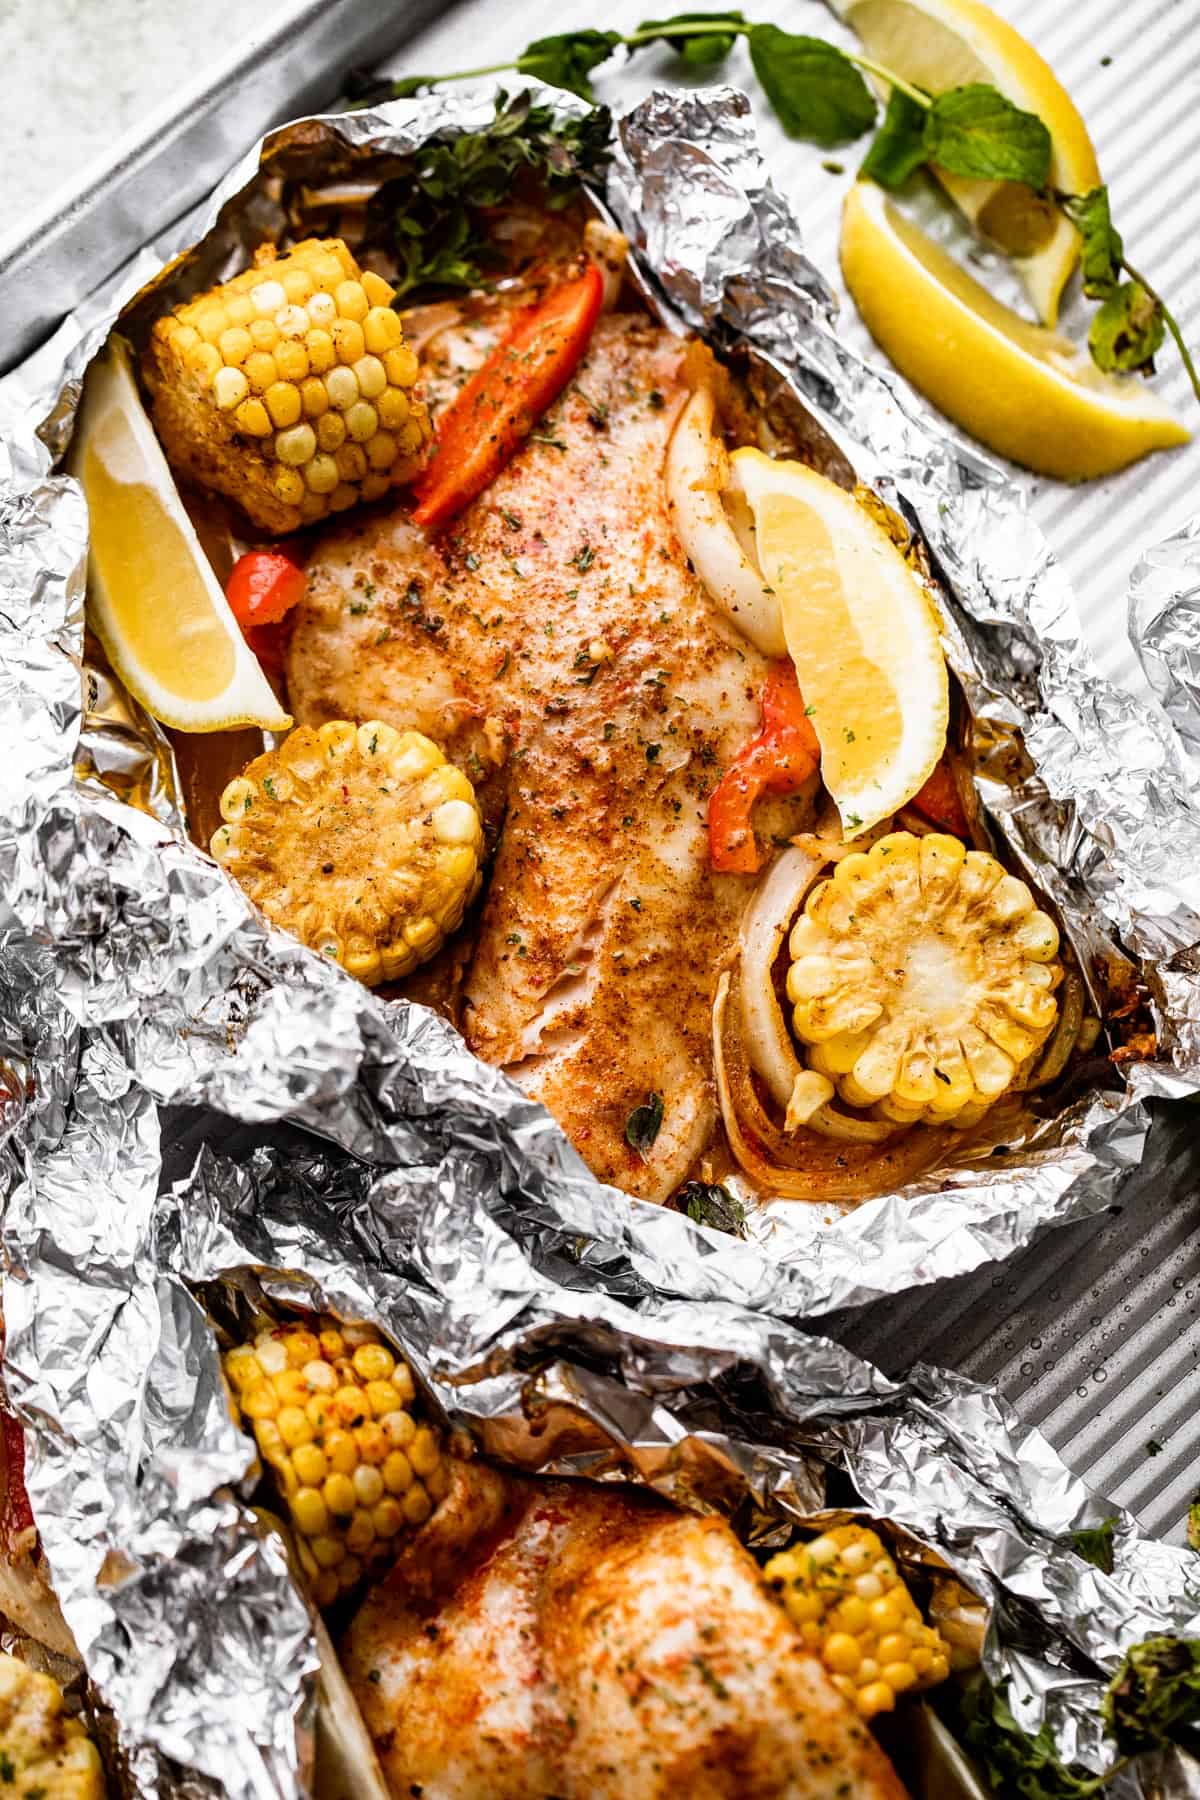 overhead shot of grilled tilapia arranged in foil packets with corn on the cob, lemon slices, and veggies arranged around the fish.